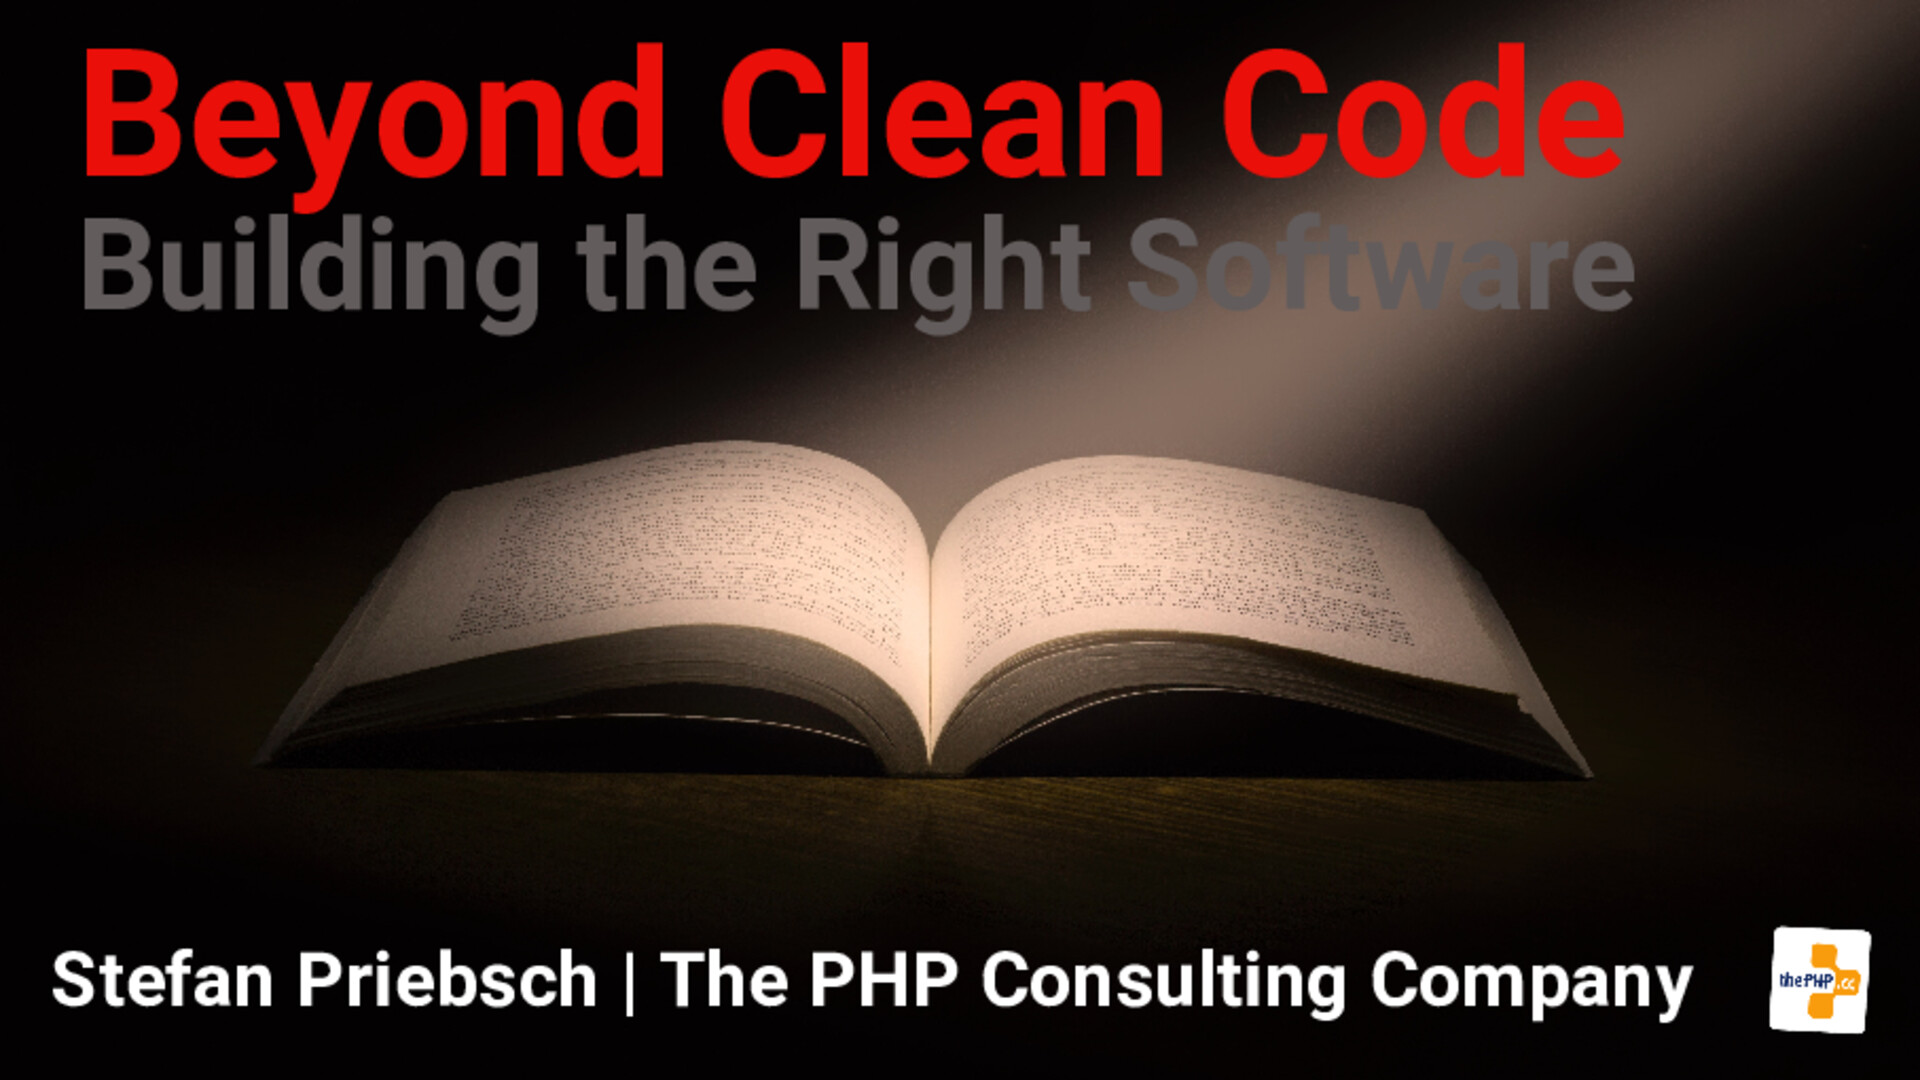 Beyond Clean Code: Building the Right Software